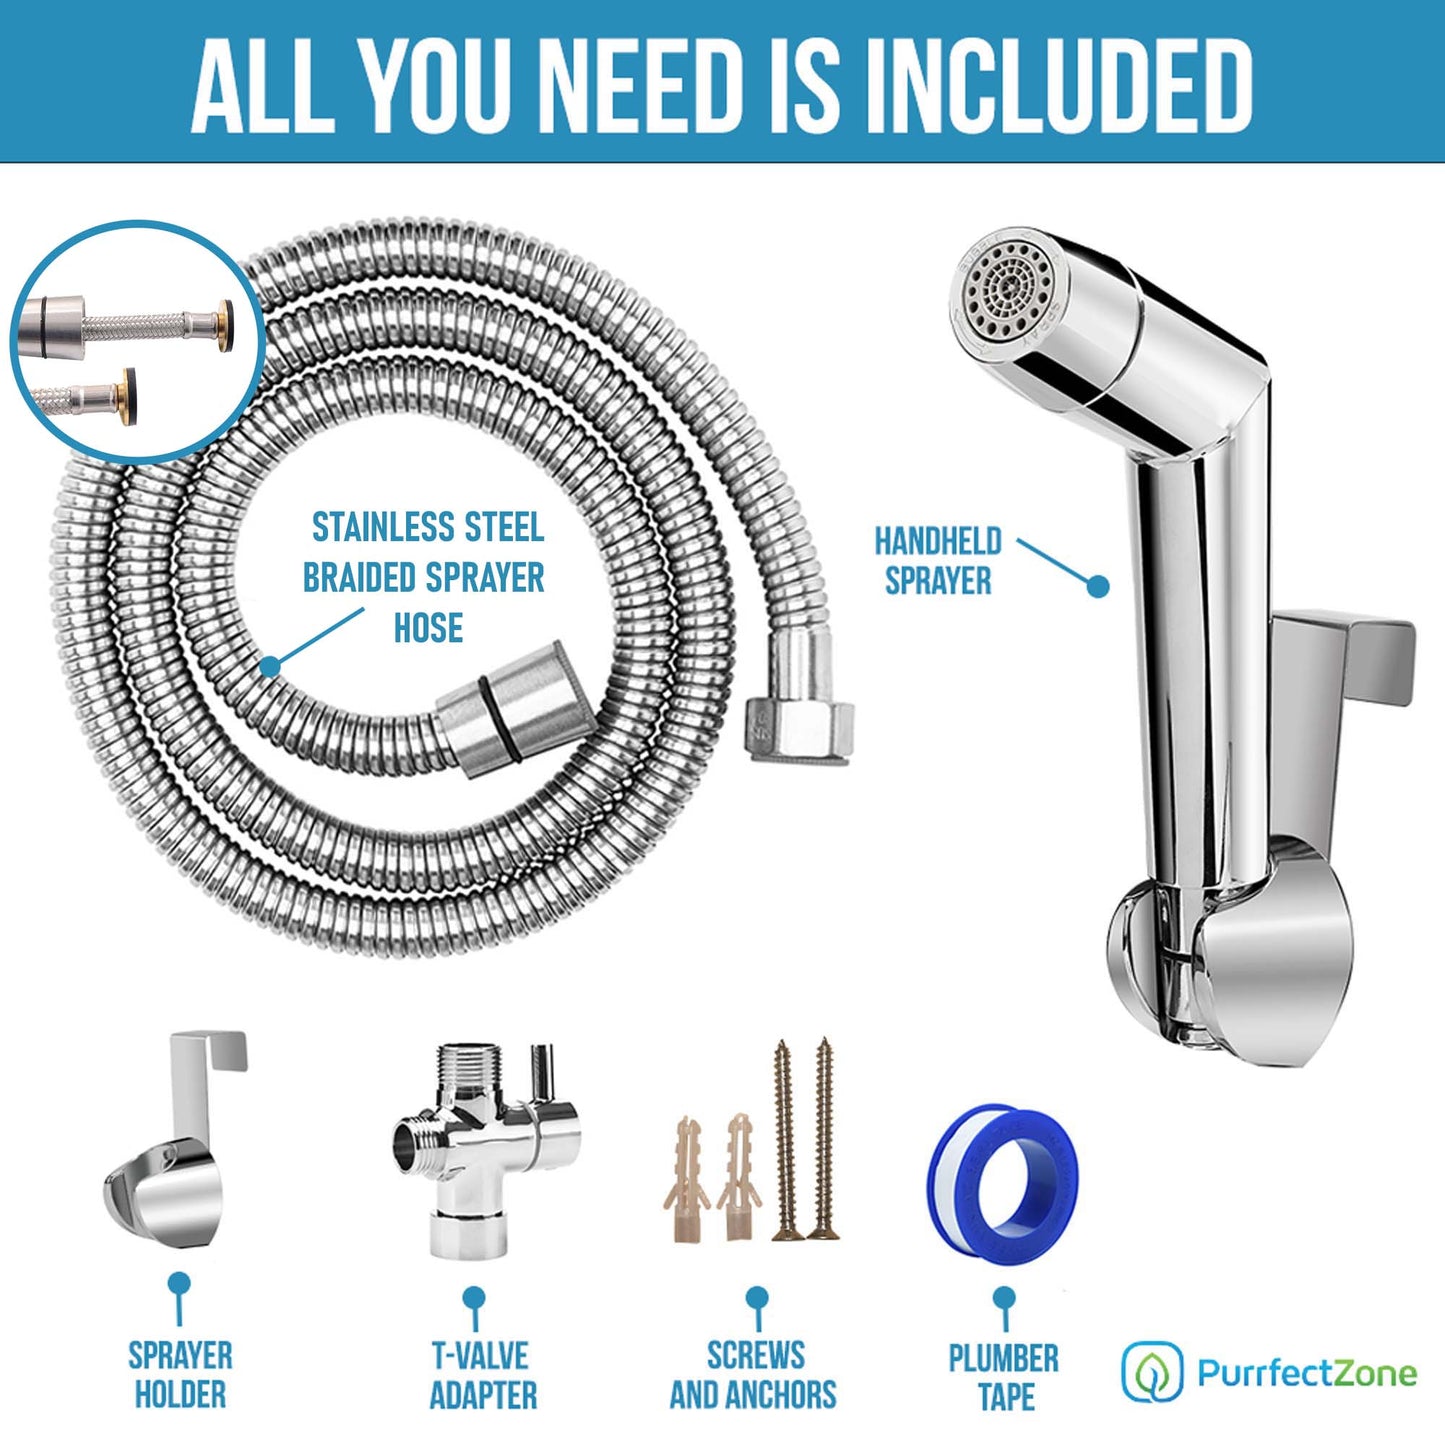 Bundle of Two Complete Kits, our Stainless Bidet Sprayer and Two-mode bidet/diaper sprayers